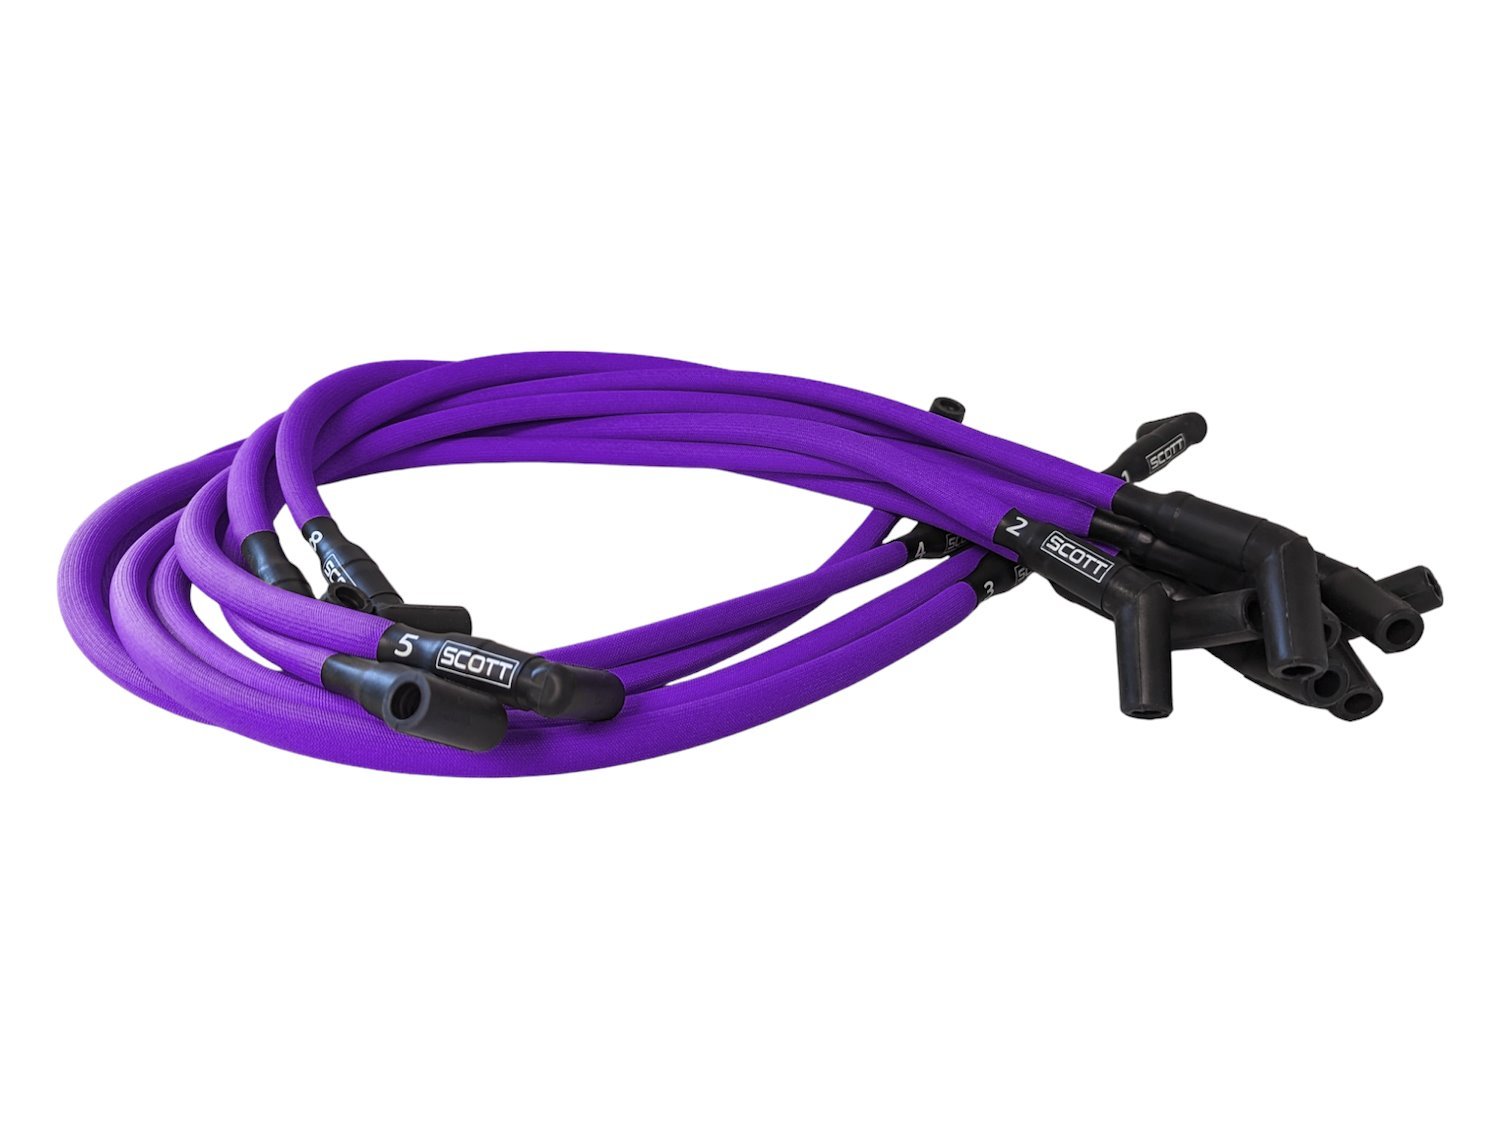 SPW-PS-429-7 High-Performance Fiberglass-Oversleeved Spark Plug Wire Set for Big Block Ford, Over Valve Cover [Purple]